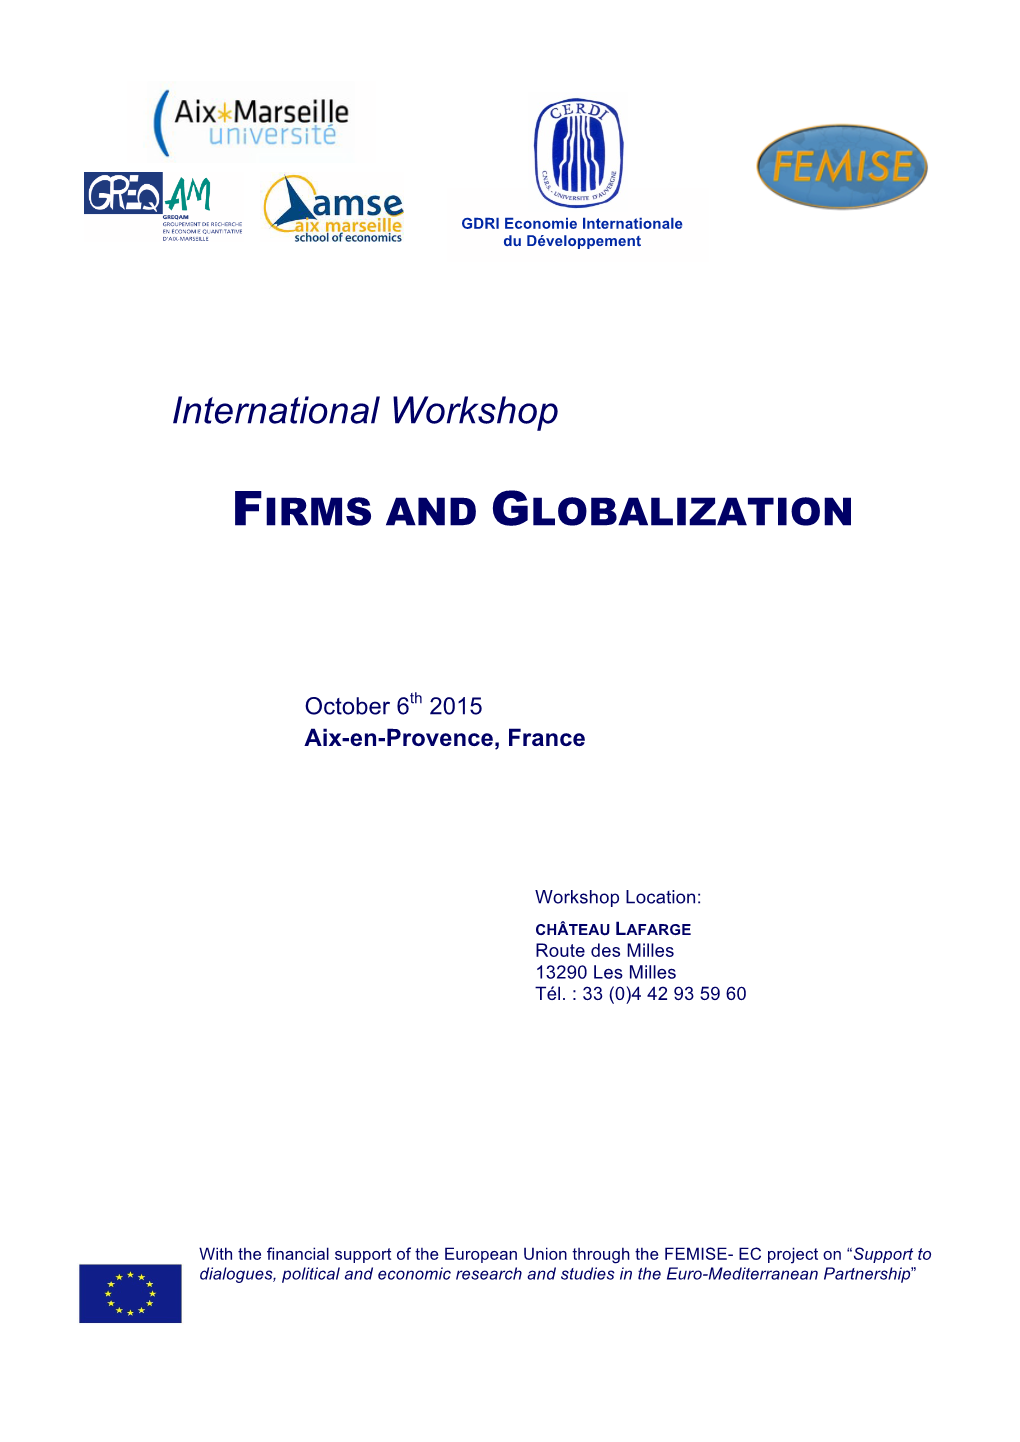 Firms and Globalization